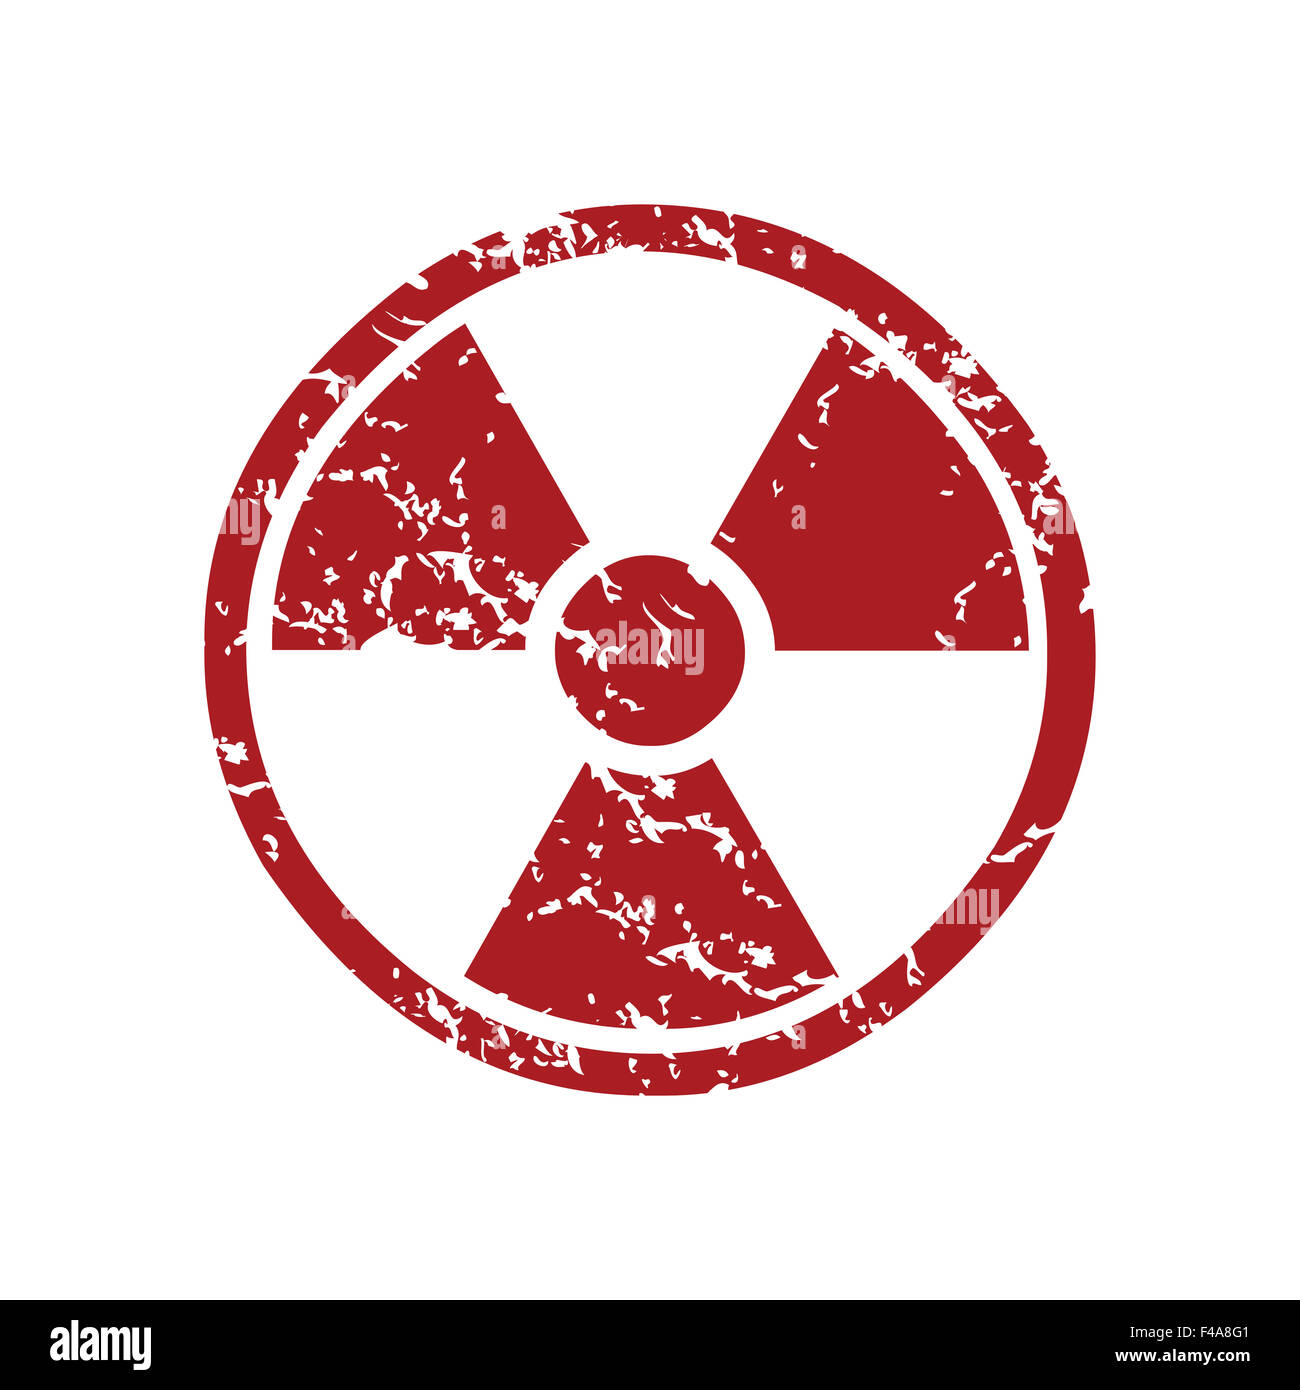 Red grunge nuclear logo Stock Photo